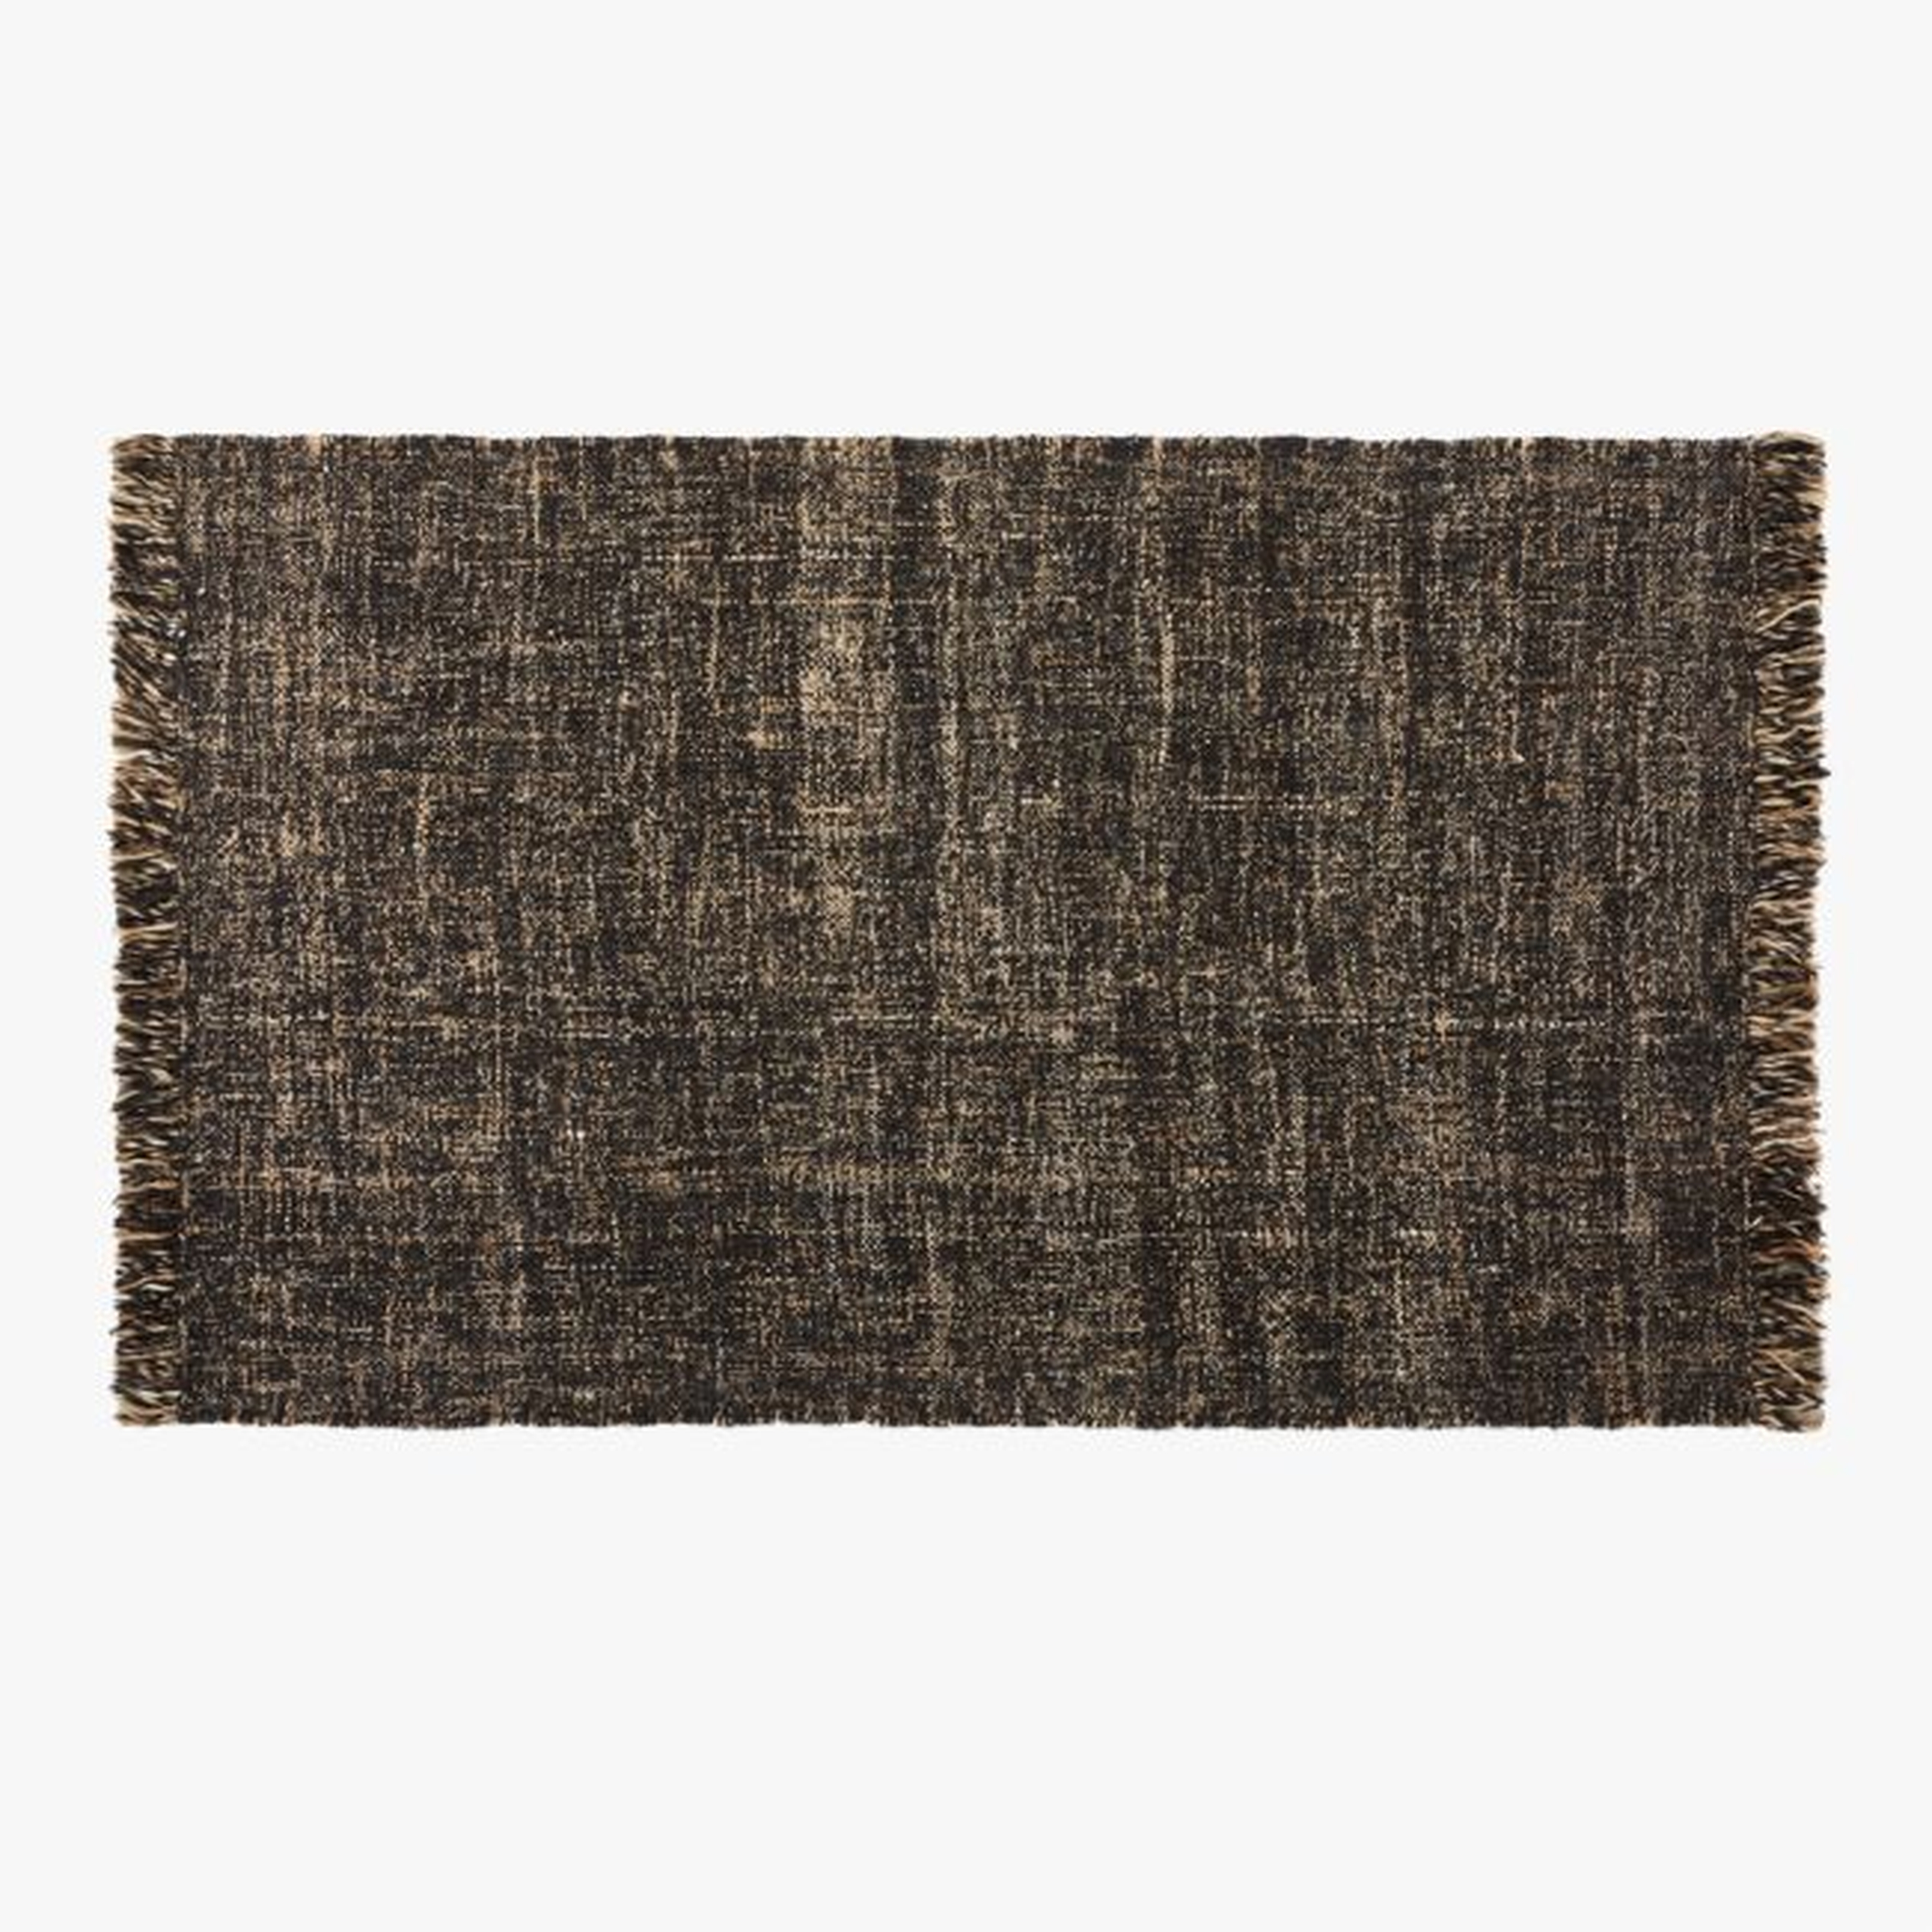 Leno Black and Natural Handwoven Jute Area Rug 5'x8' - CB2